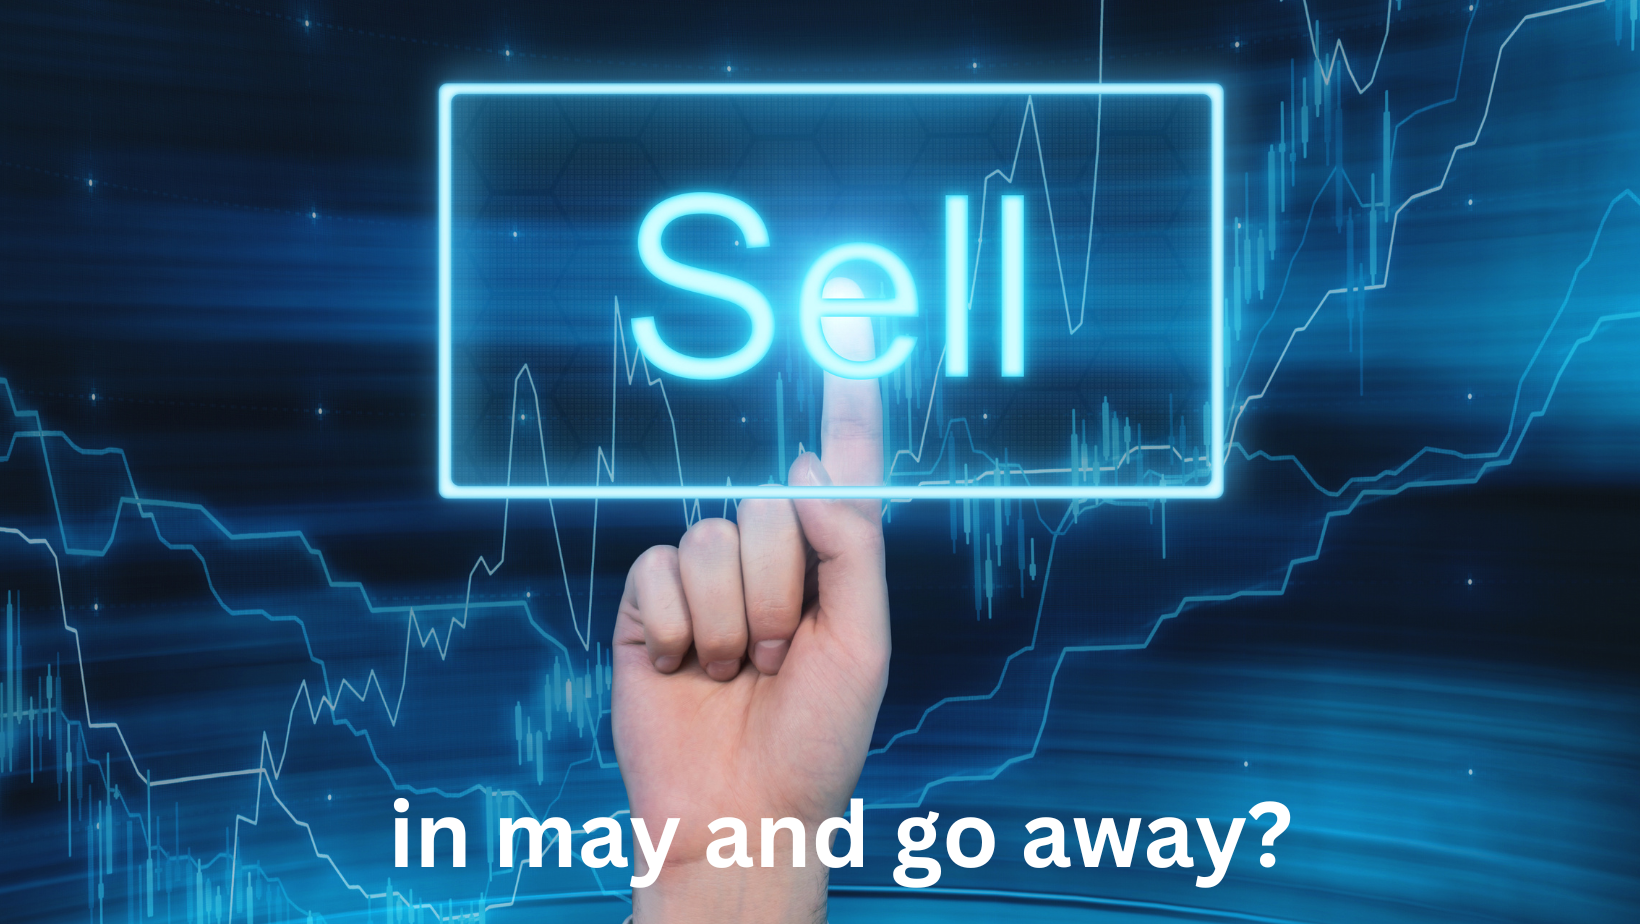 Sell in May and go away